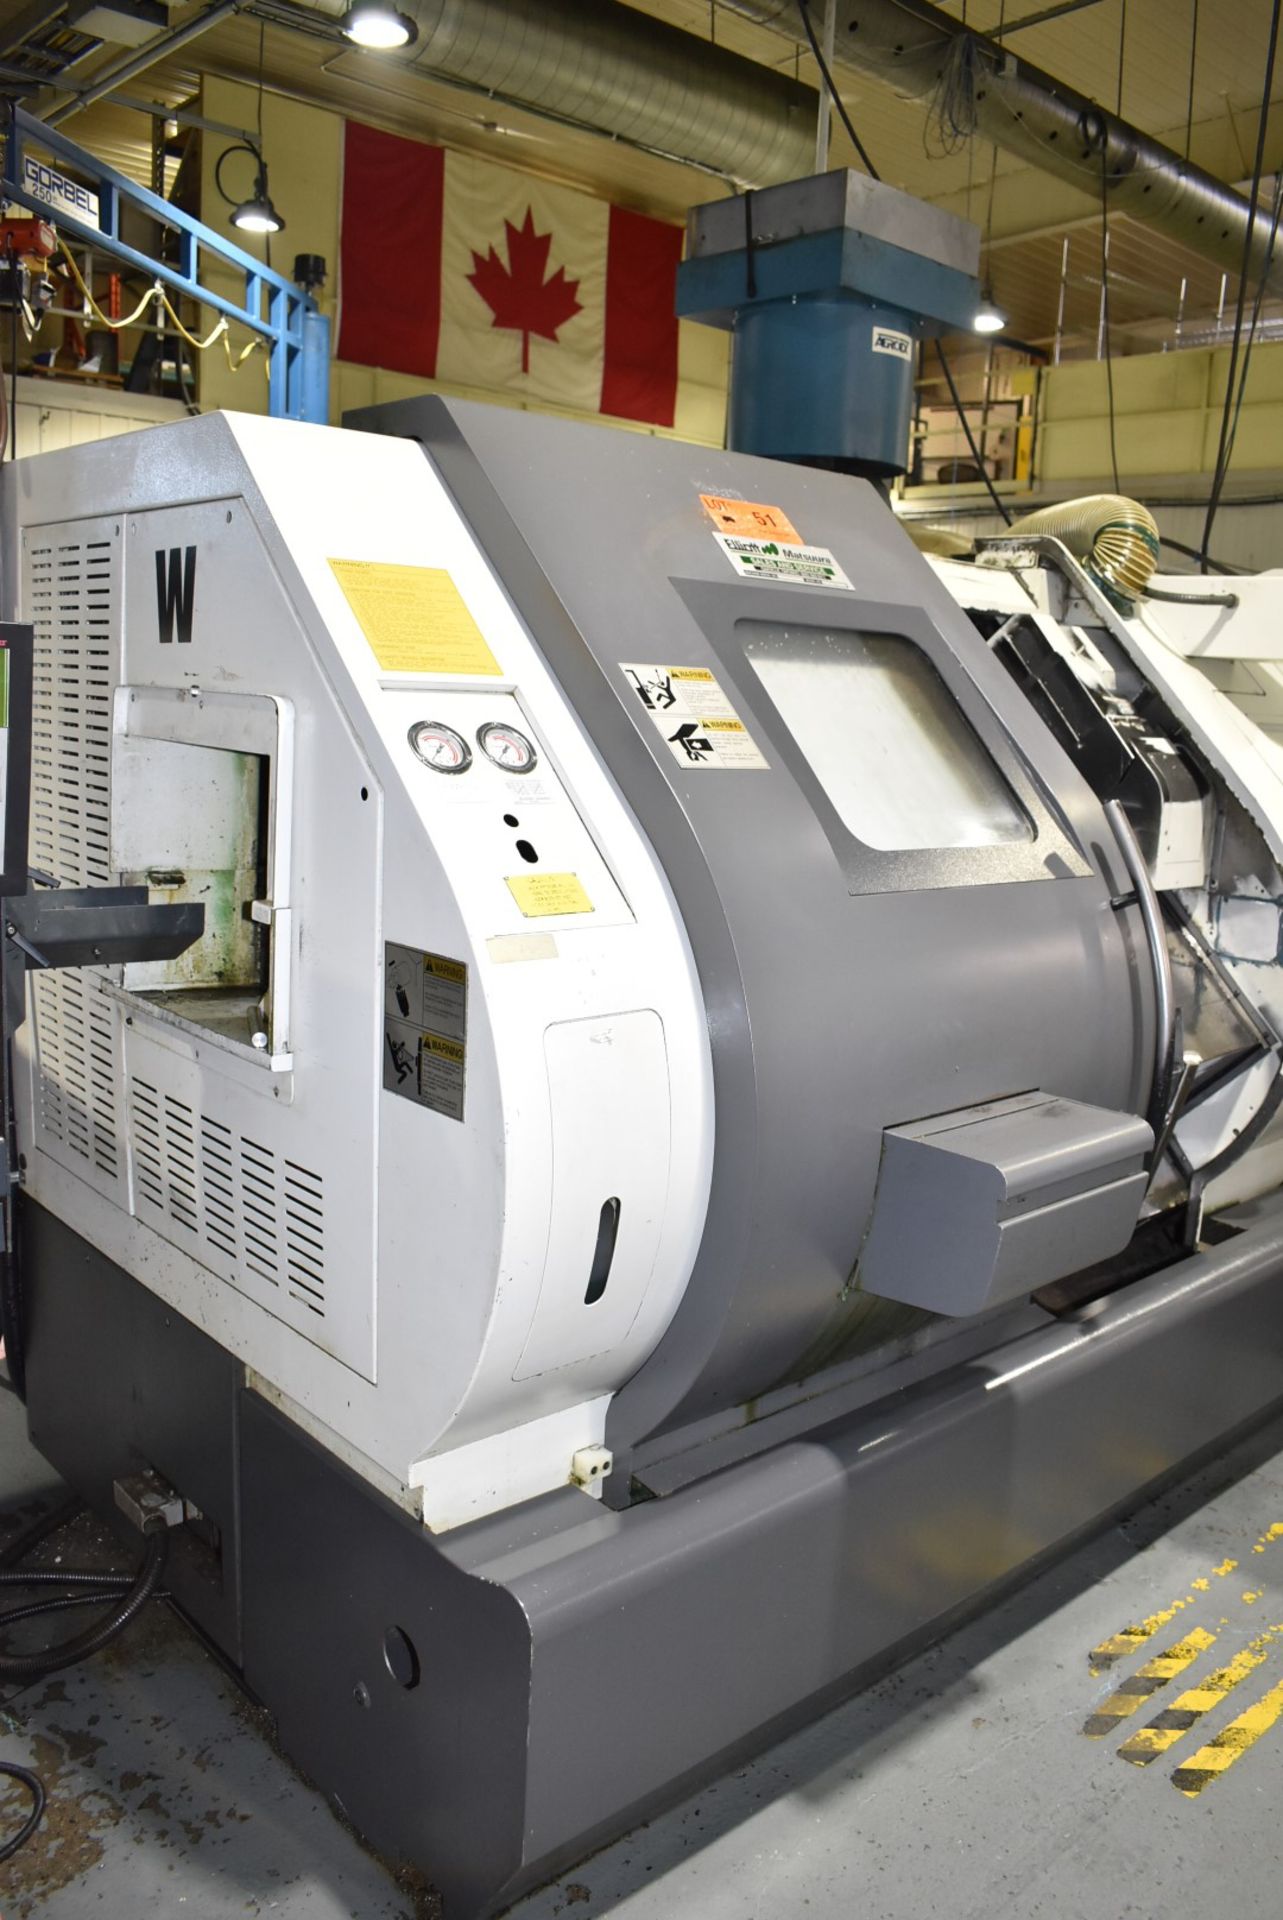 NAKAMURA-TOME (2006) WT-150 MMYS MULTI-AXIS OPPOSED SPINDLE AND TWIN TURRET CNC MULTI-TASKING CENTER - Image 10 of 15